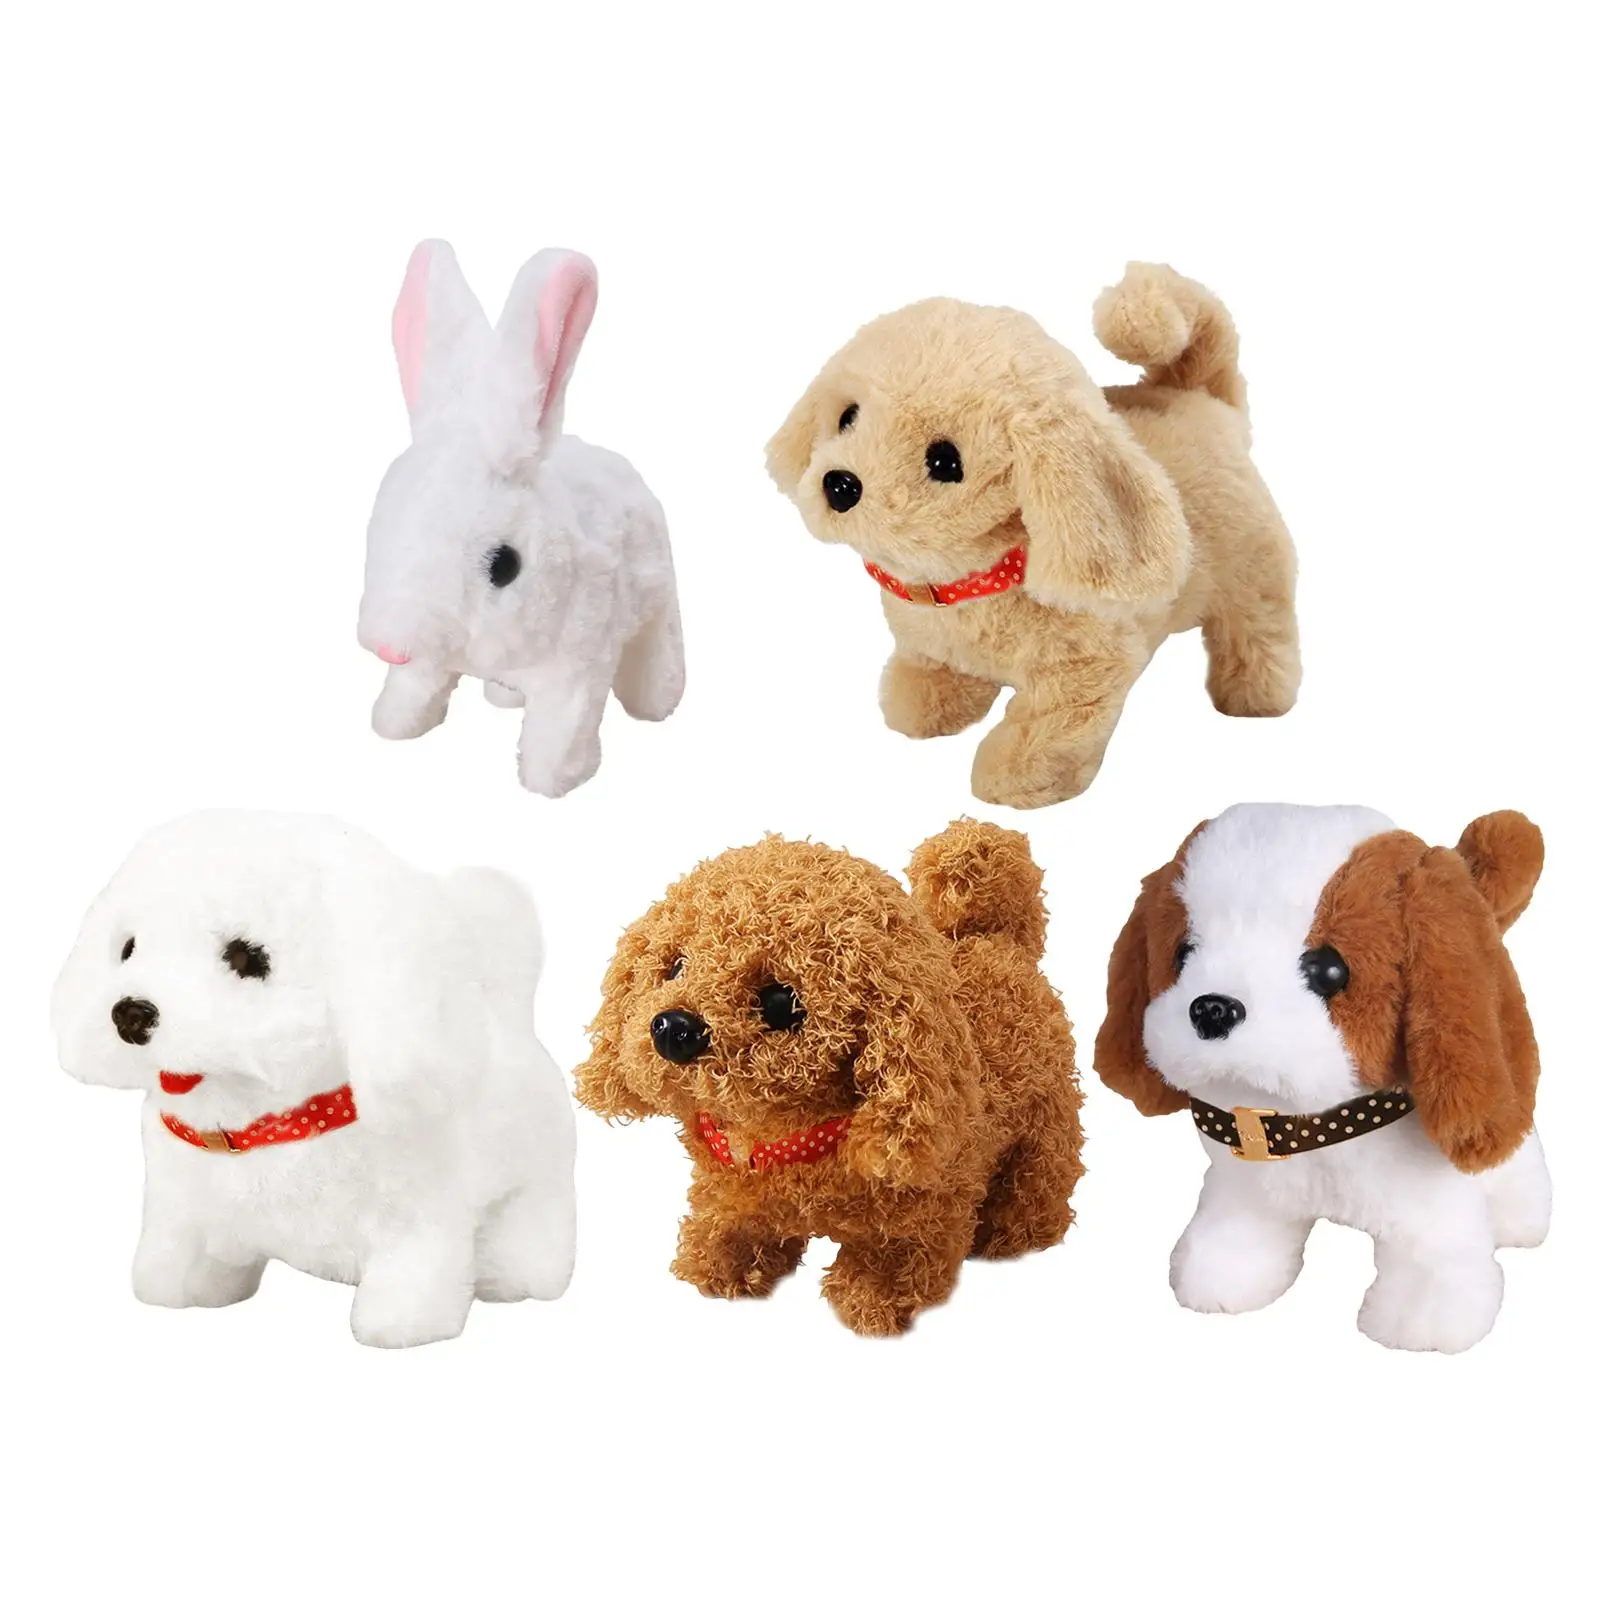 Simulation Electric Plush Animals Toy Interactive Animal Toy with Sound Toy Stuffed Animal Plush Toy for Children Birthday Gifts